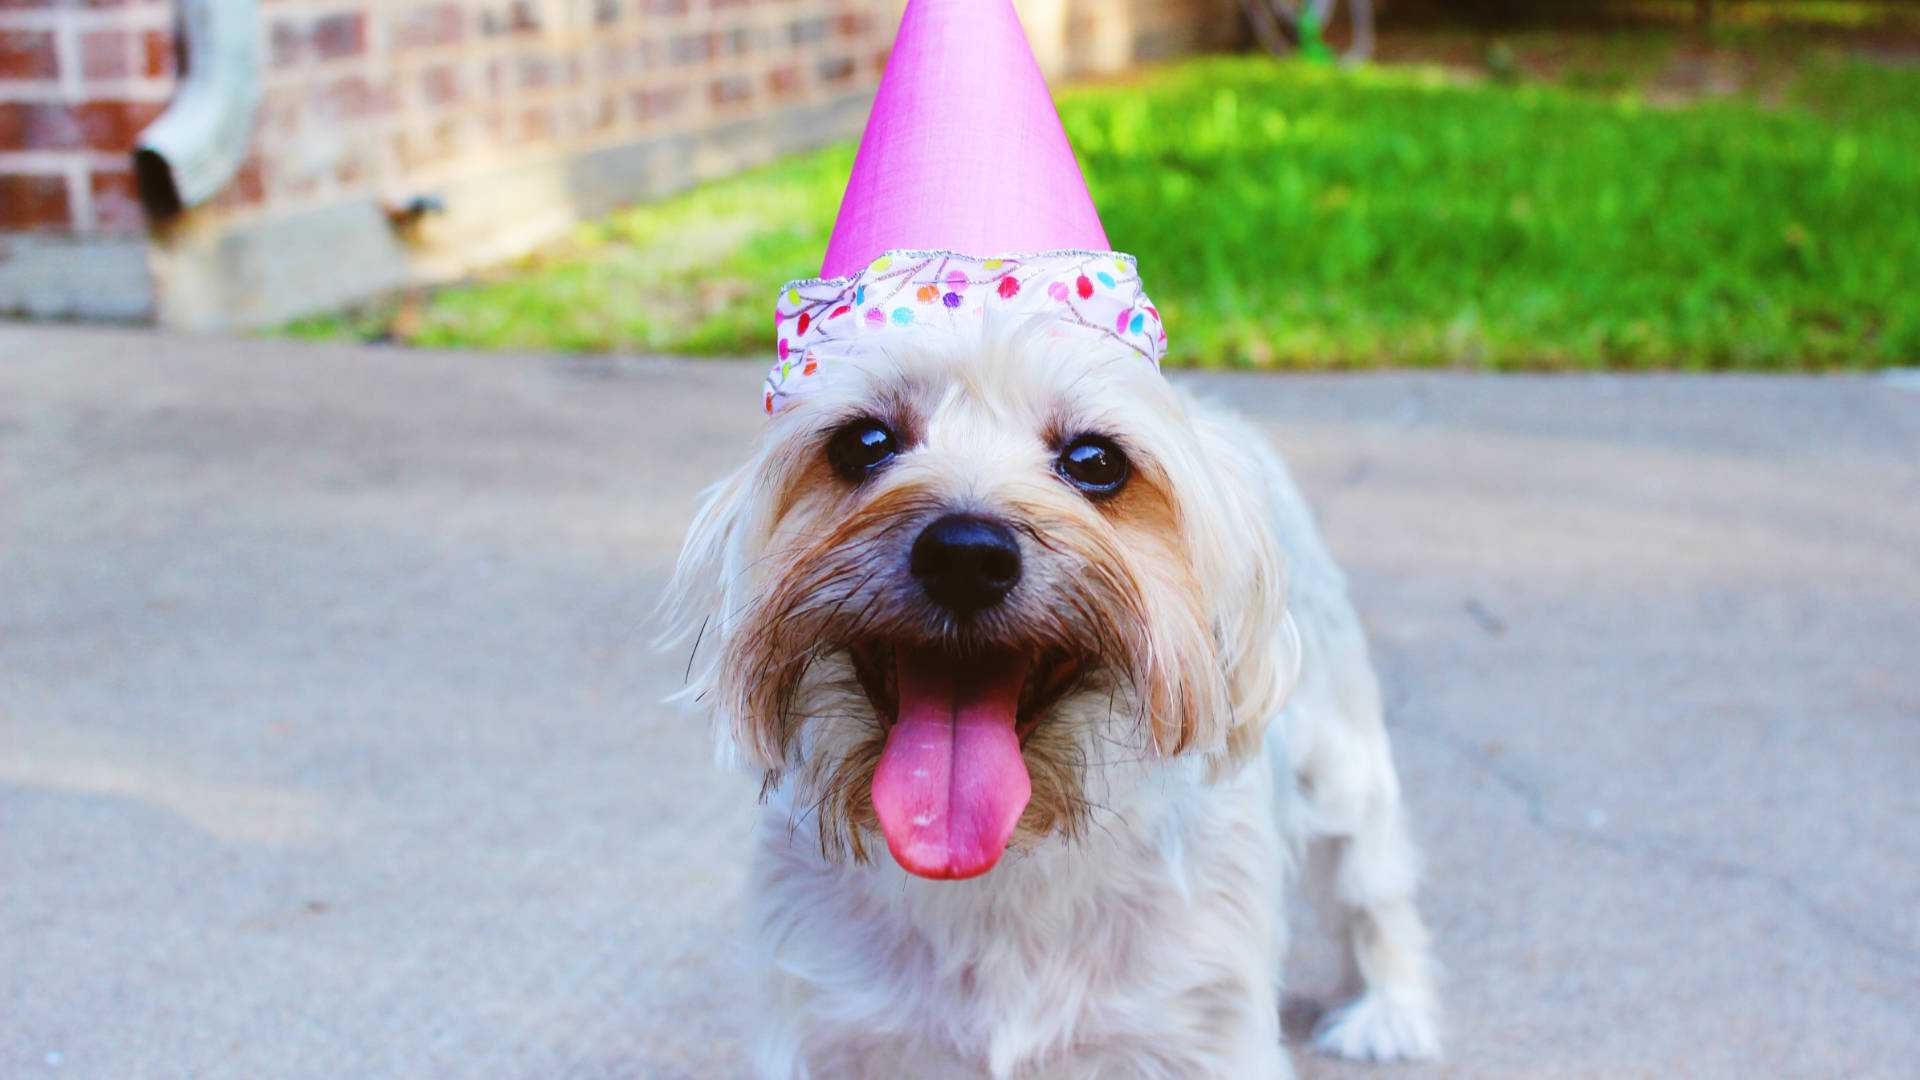 Celebrate with friends, family and pets at a Pawfect Tea Party!